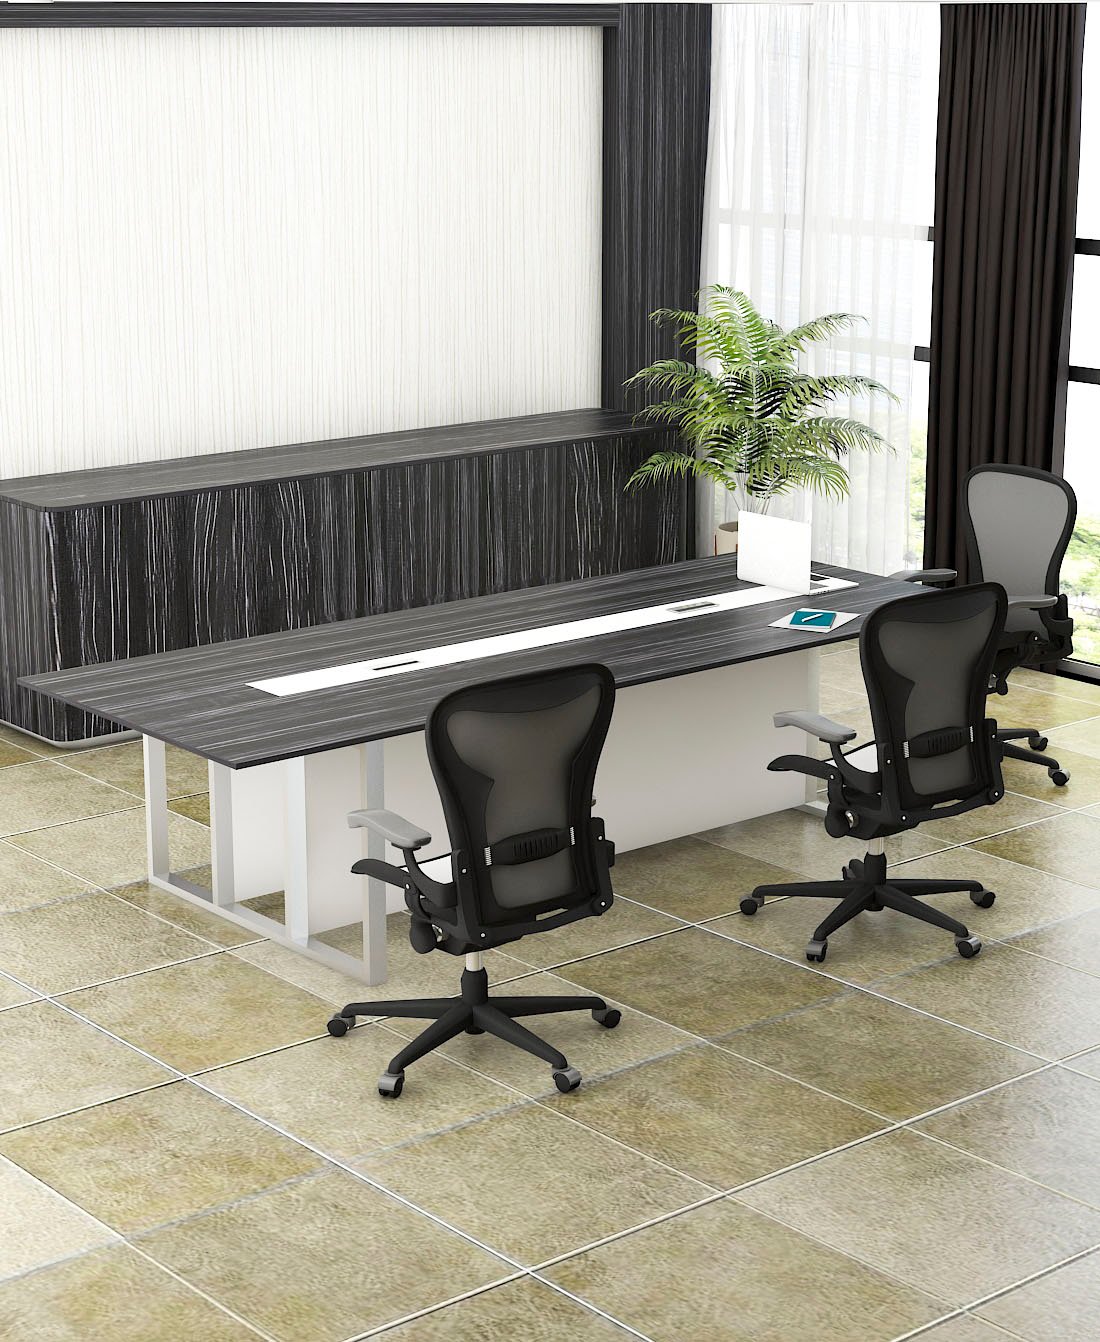 Skymoon Furniture Stores Office furniture